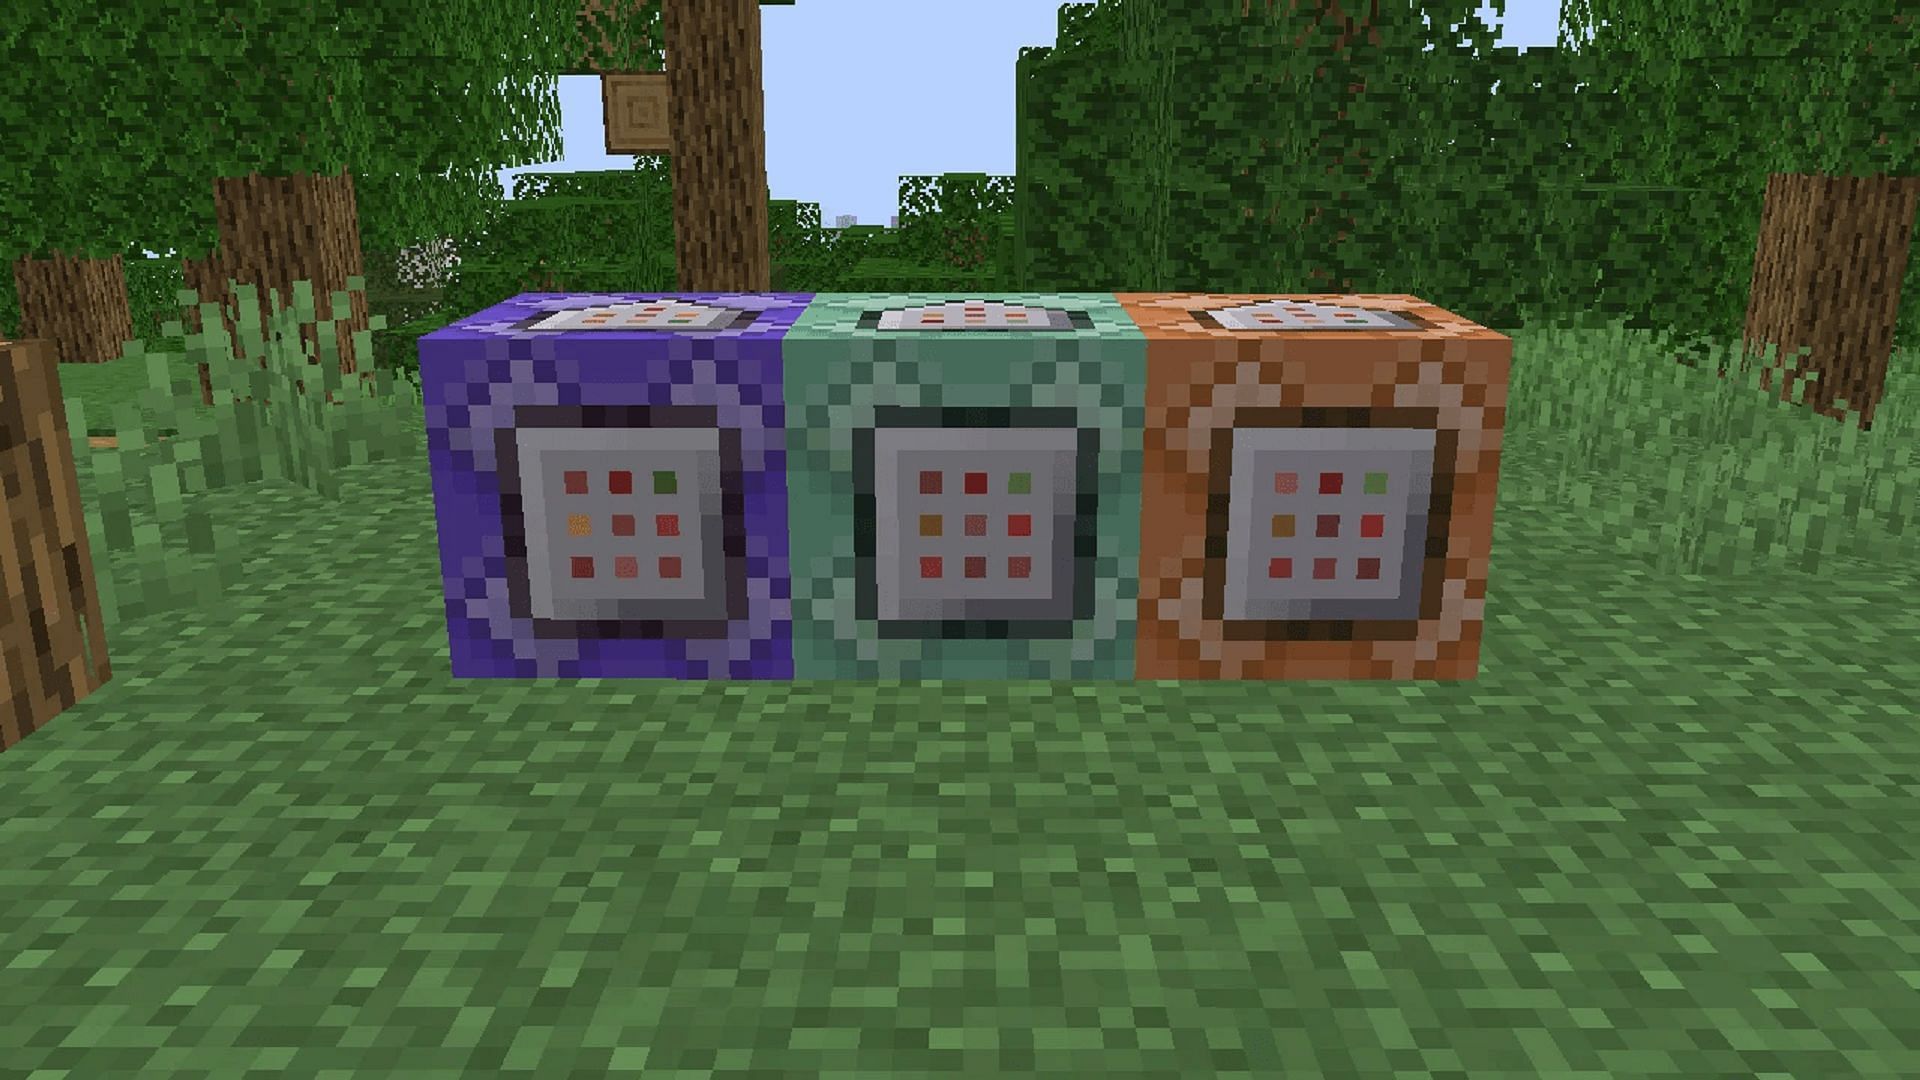 Commands can be executed both by players and by command blocks in Minecraft (Image via Mojang)